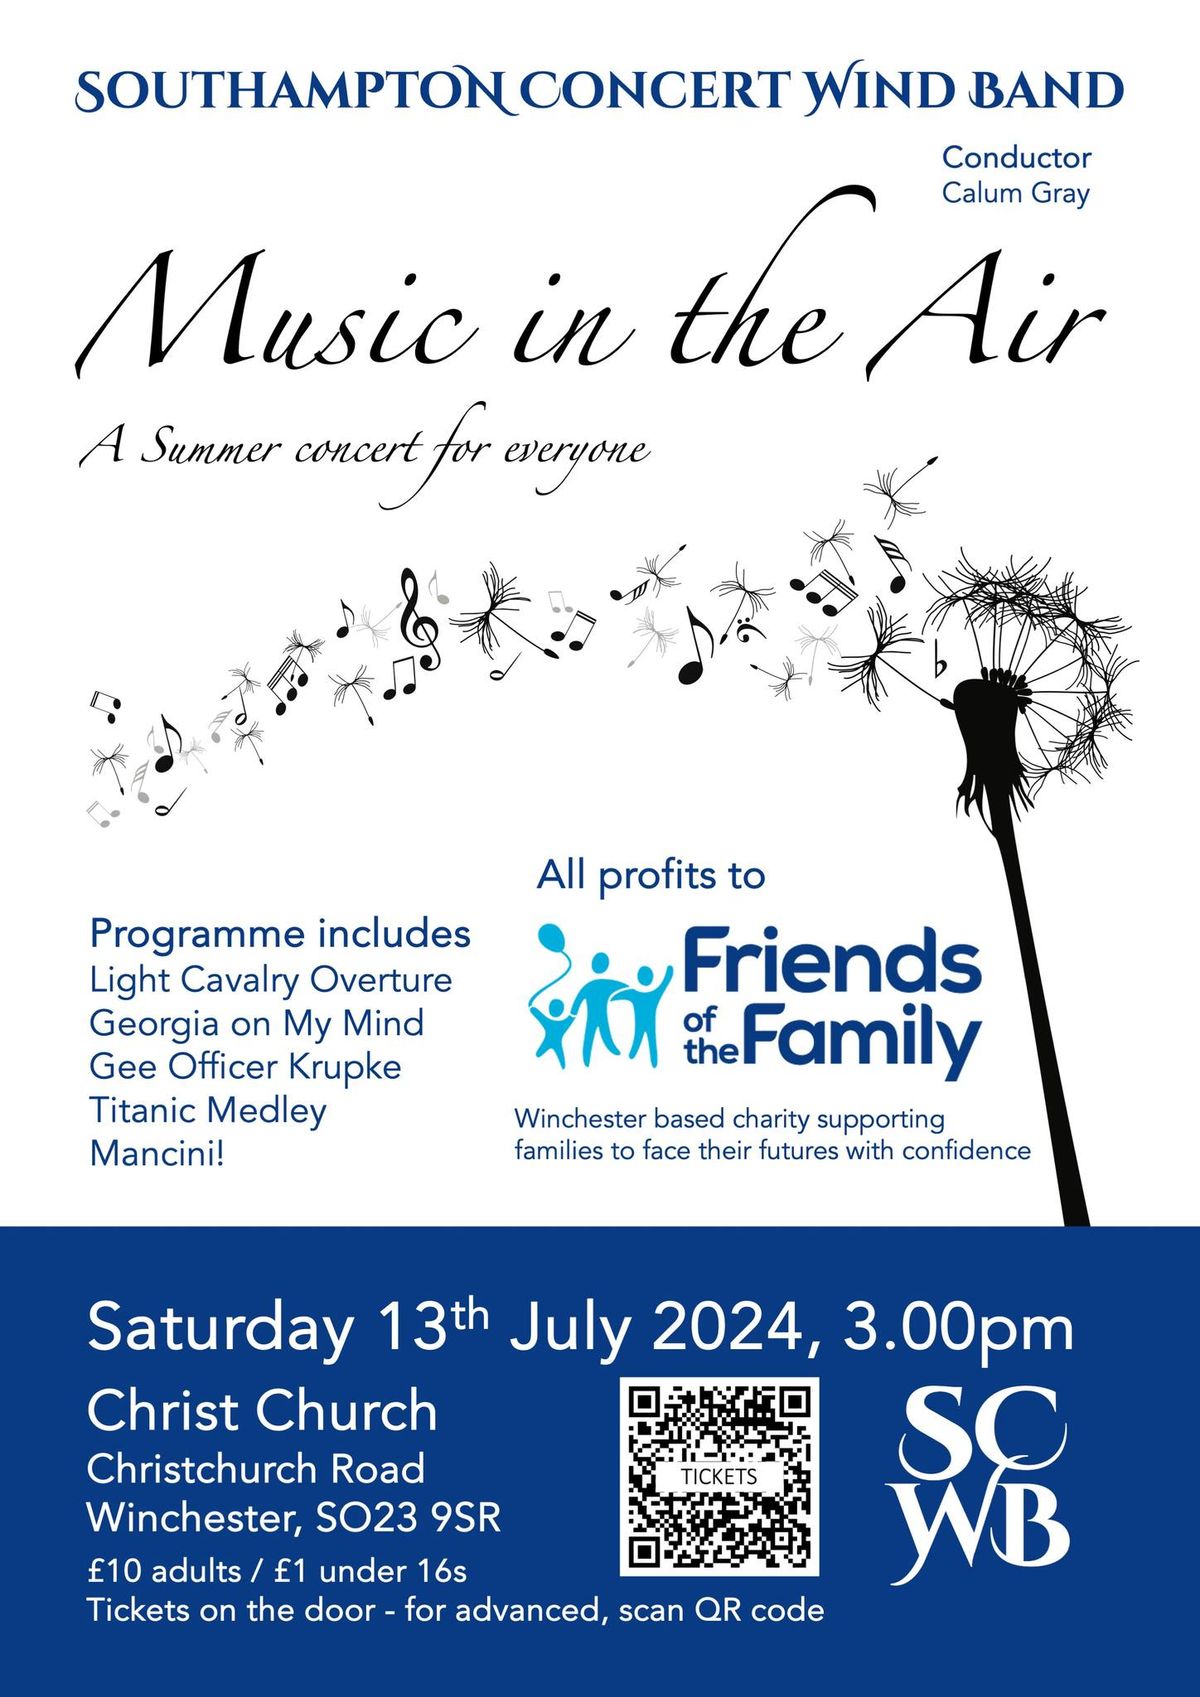 SOUTHAMPTON CONCERT WIND BAND "MUSIC in the AIR" concert